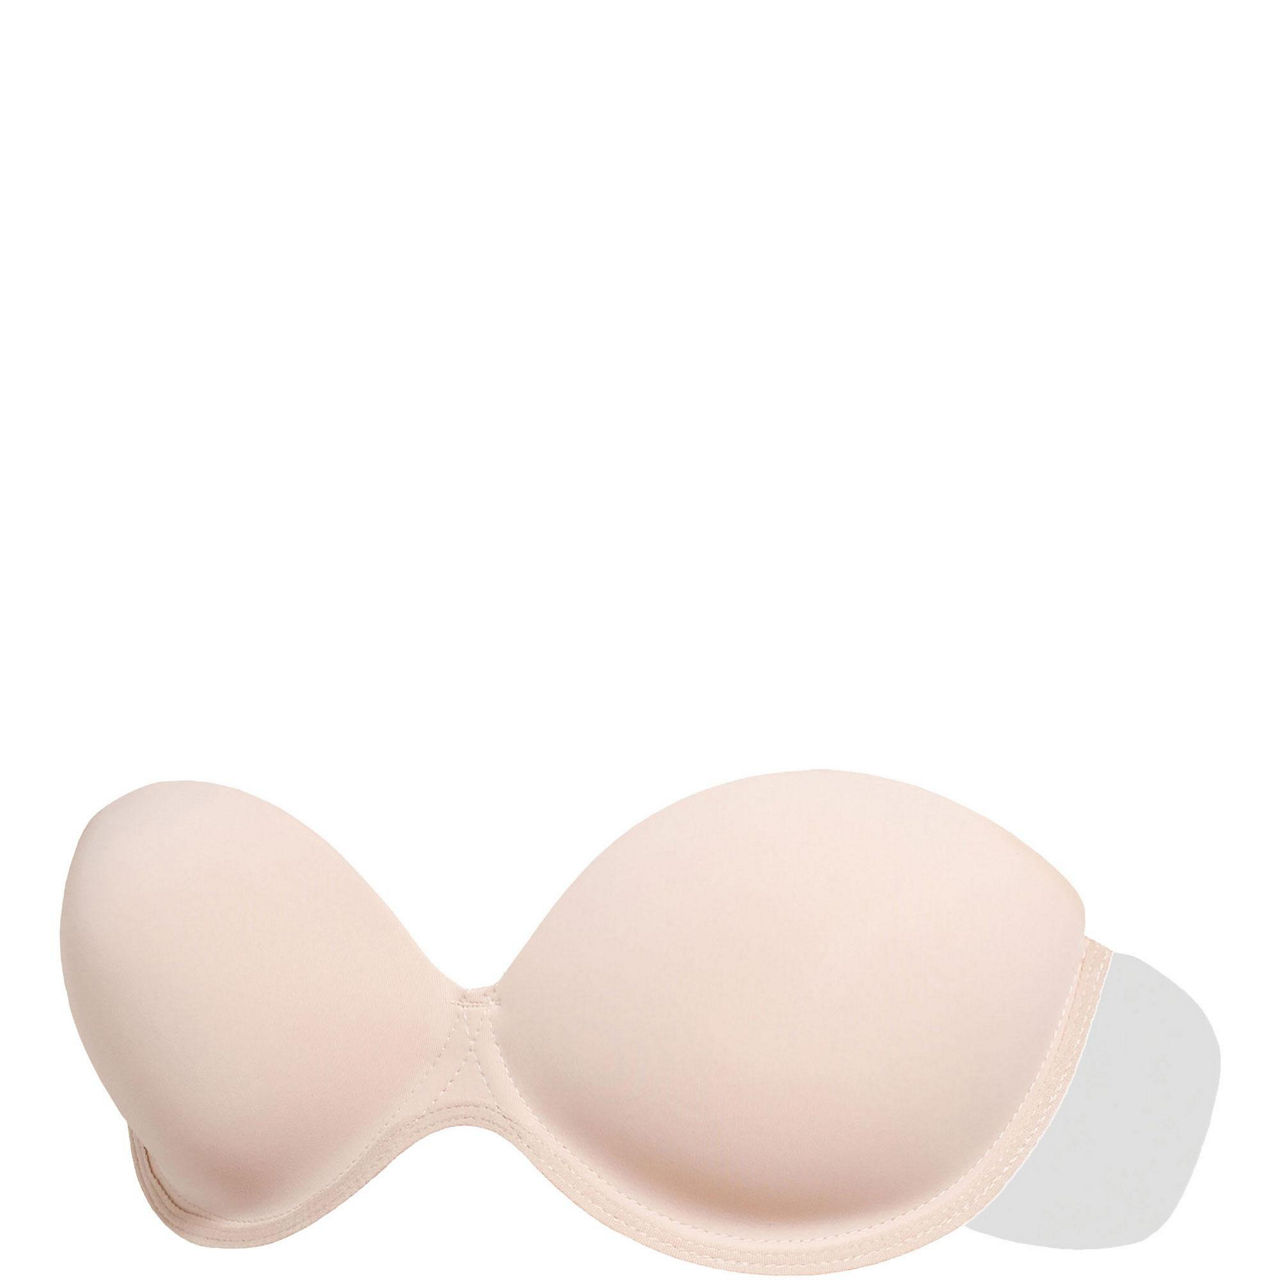 FASHION FORMS~ Body sculpting backless strapless bra